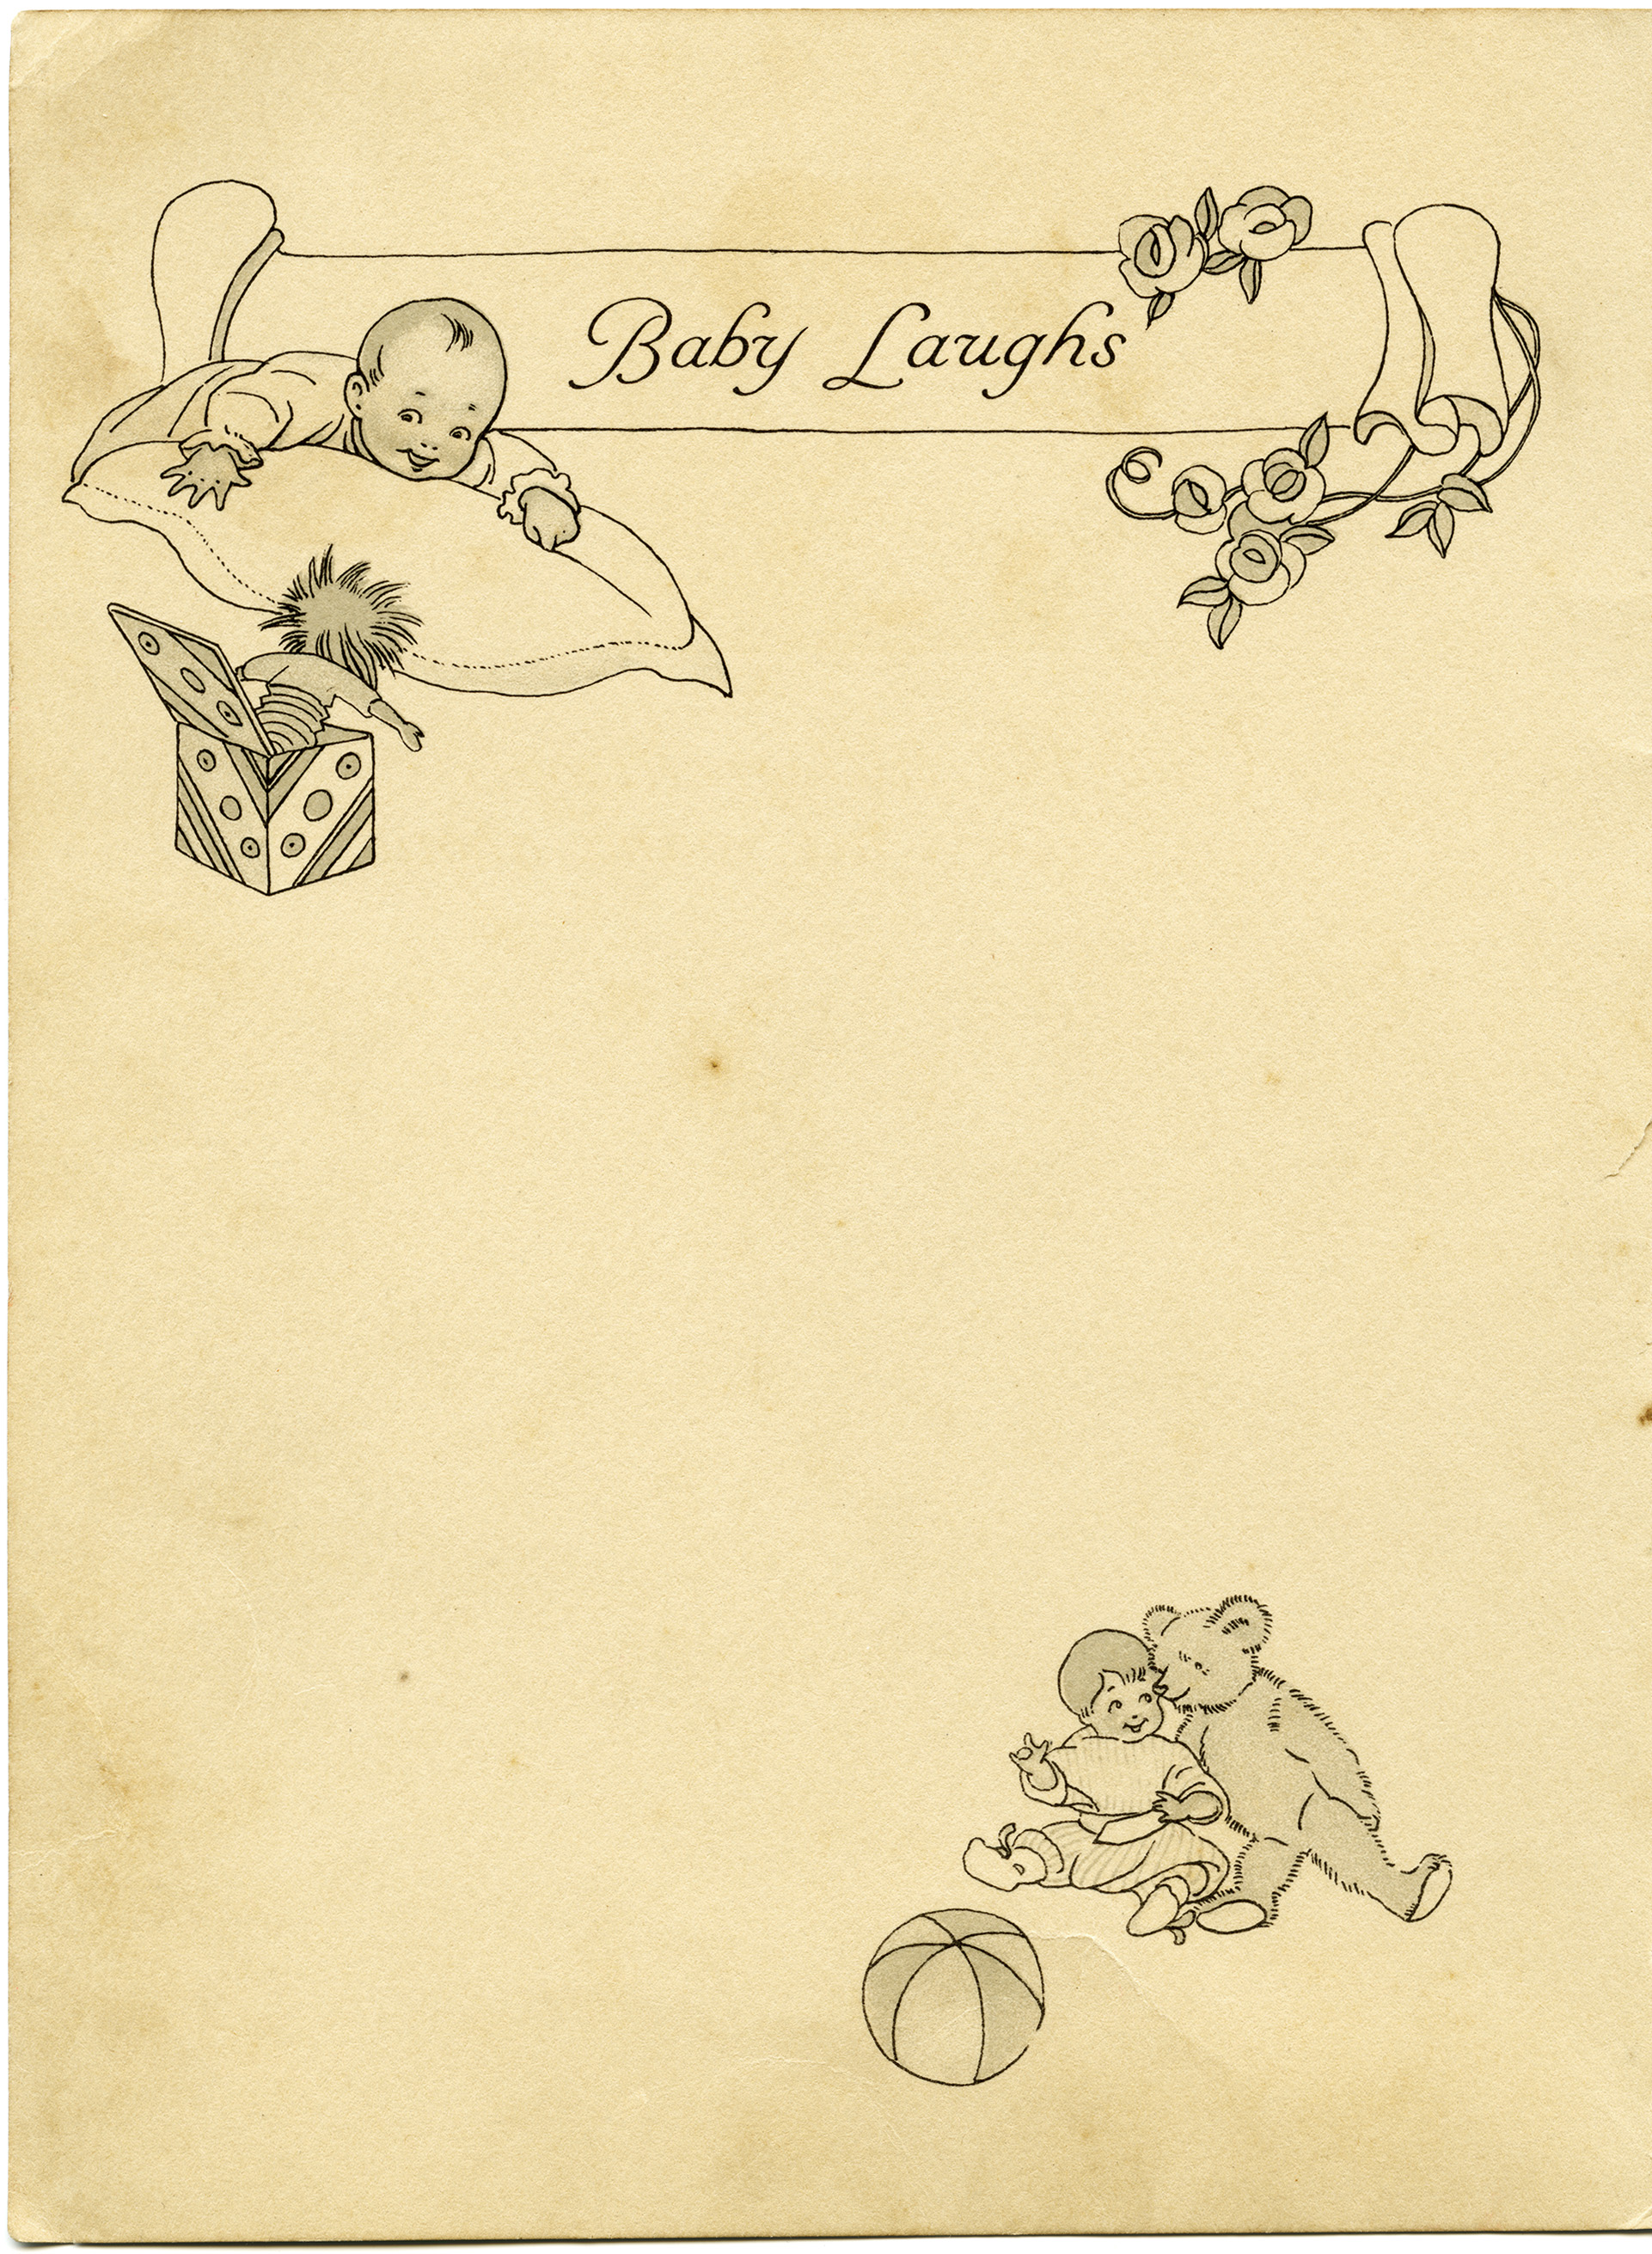 edith truman woolf, vintage baby clipart, shabby book page, free digital graphics, antique baby image